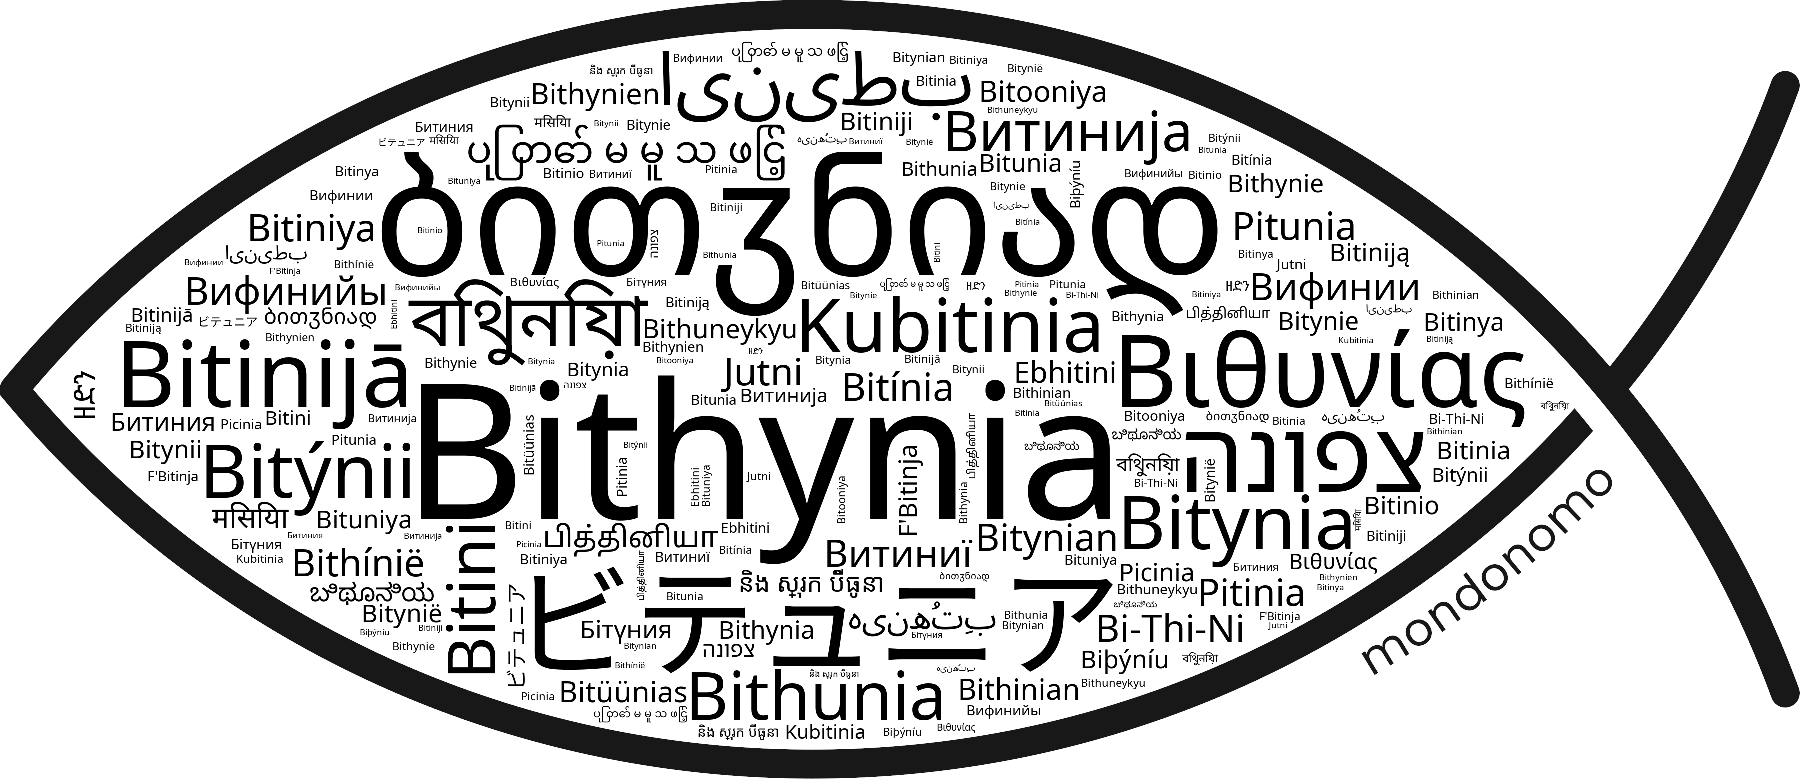 Name Bithynia in the world's Bibles